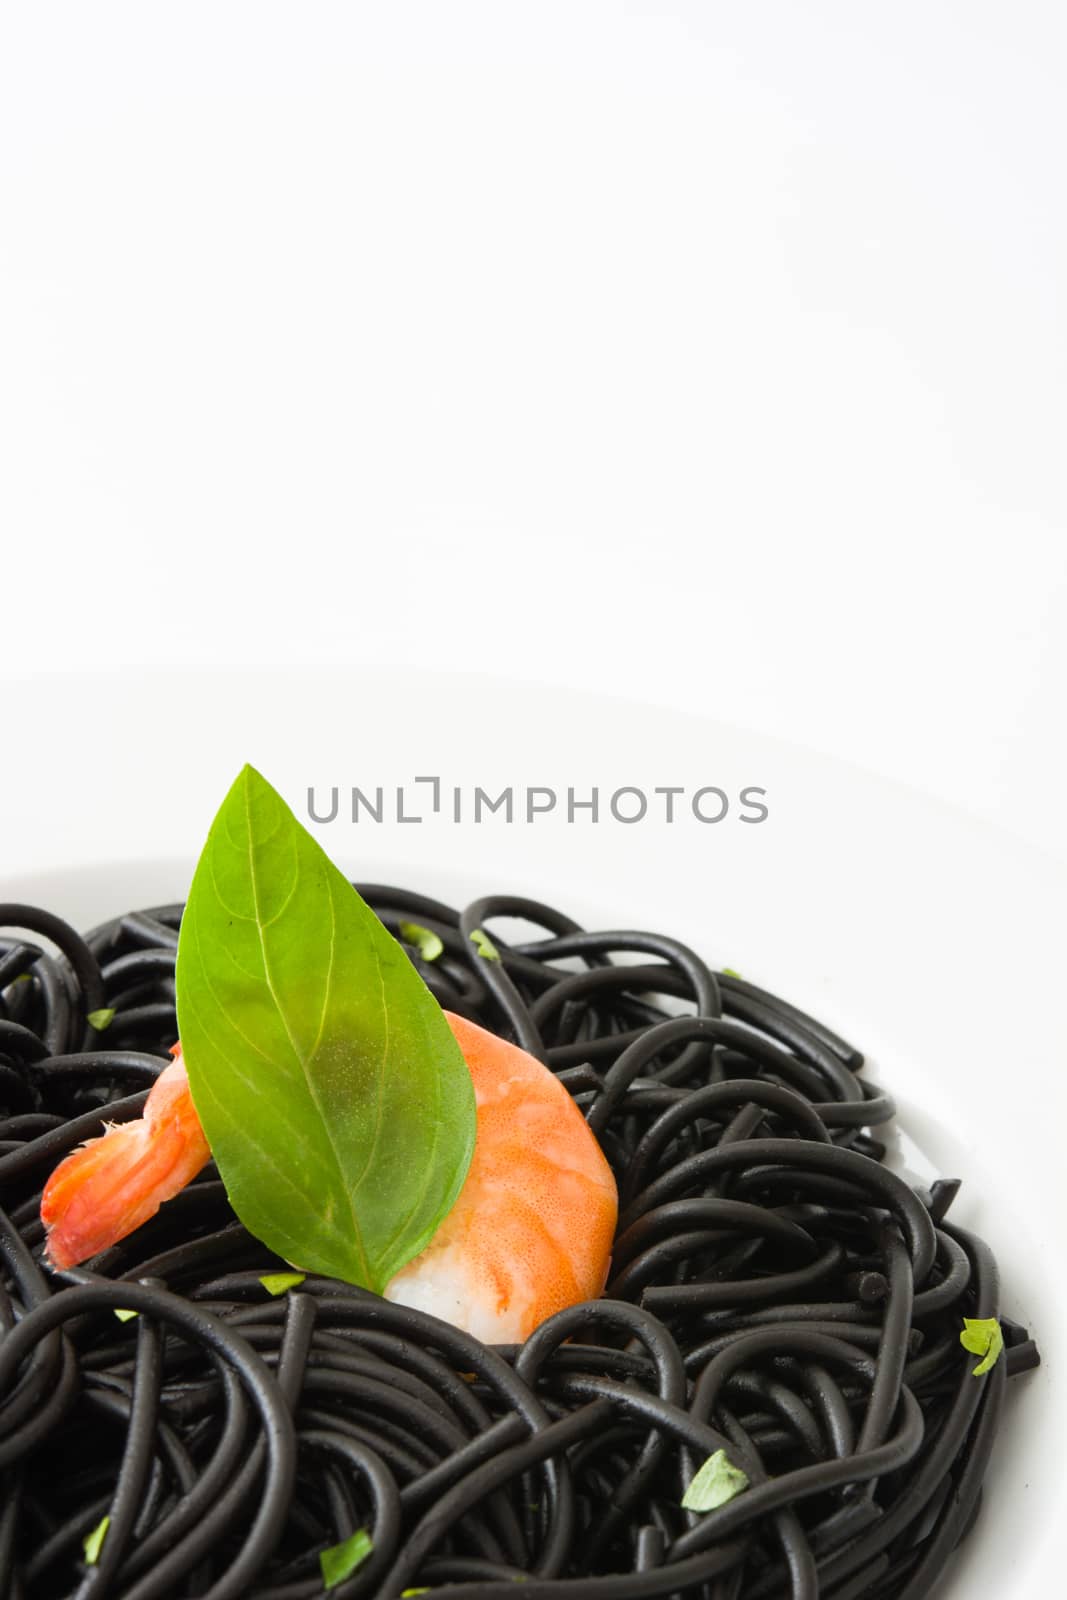 Black spaghetti with prawns and basil isolated on white background